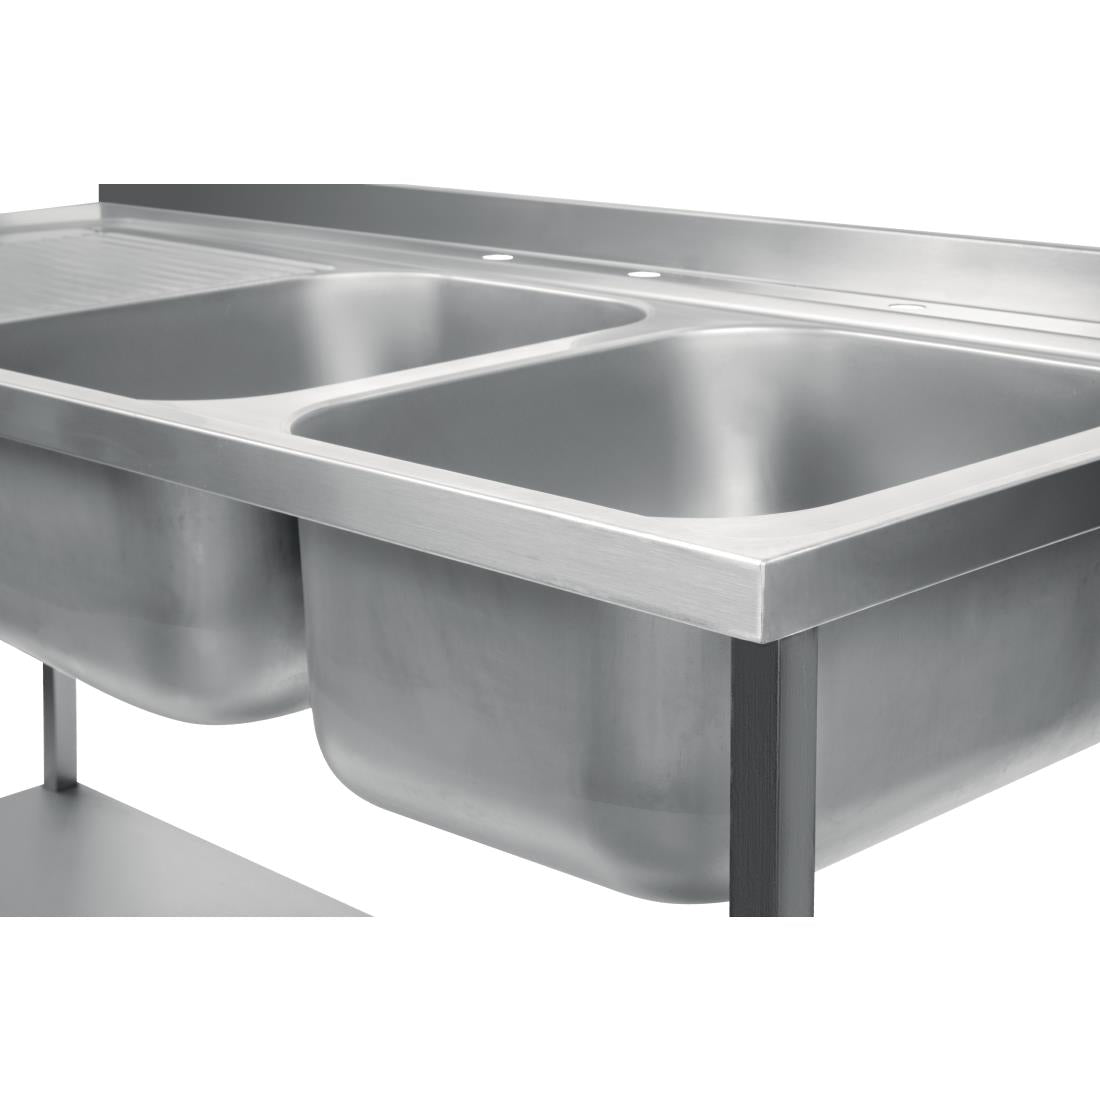 DR393 Holmes Fully Assembled Stainless Steel Sink Left Hand Drainer 1800mm JD Catering Equipment Solutions Ltd